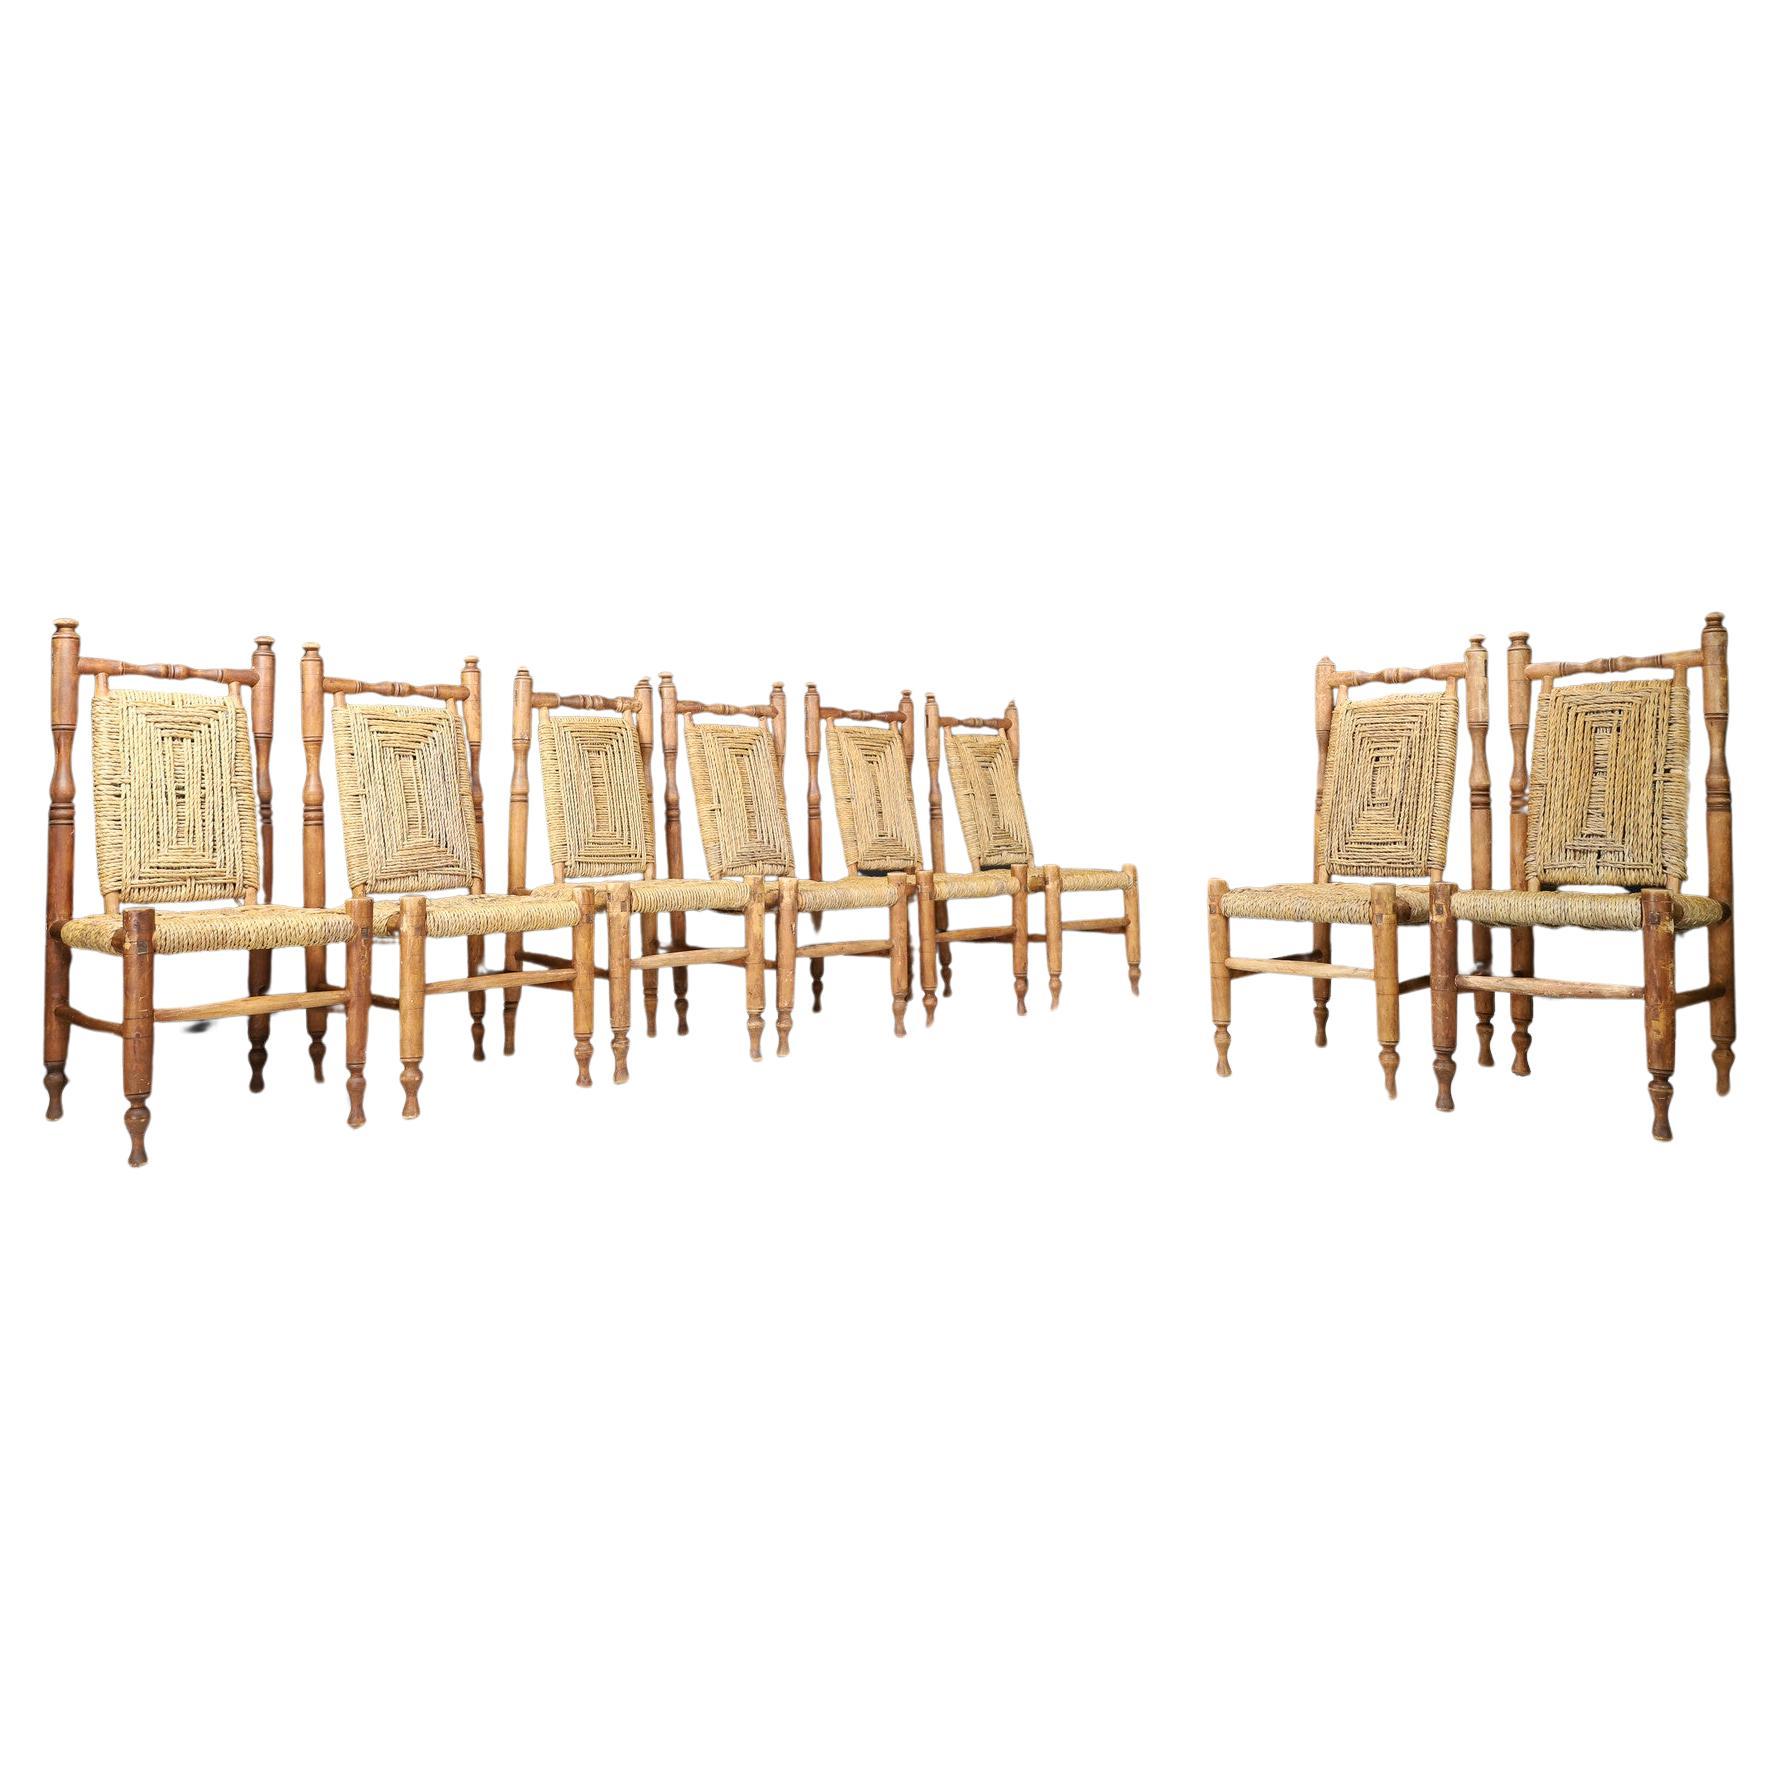 Adrien Audoux and Frida Minet, Set of 8 Mid Century Dining Chairs, circa 1950s 1